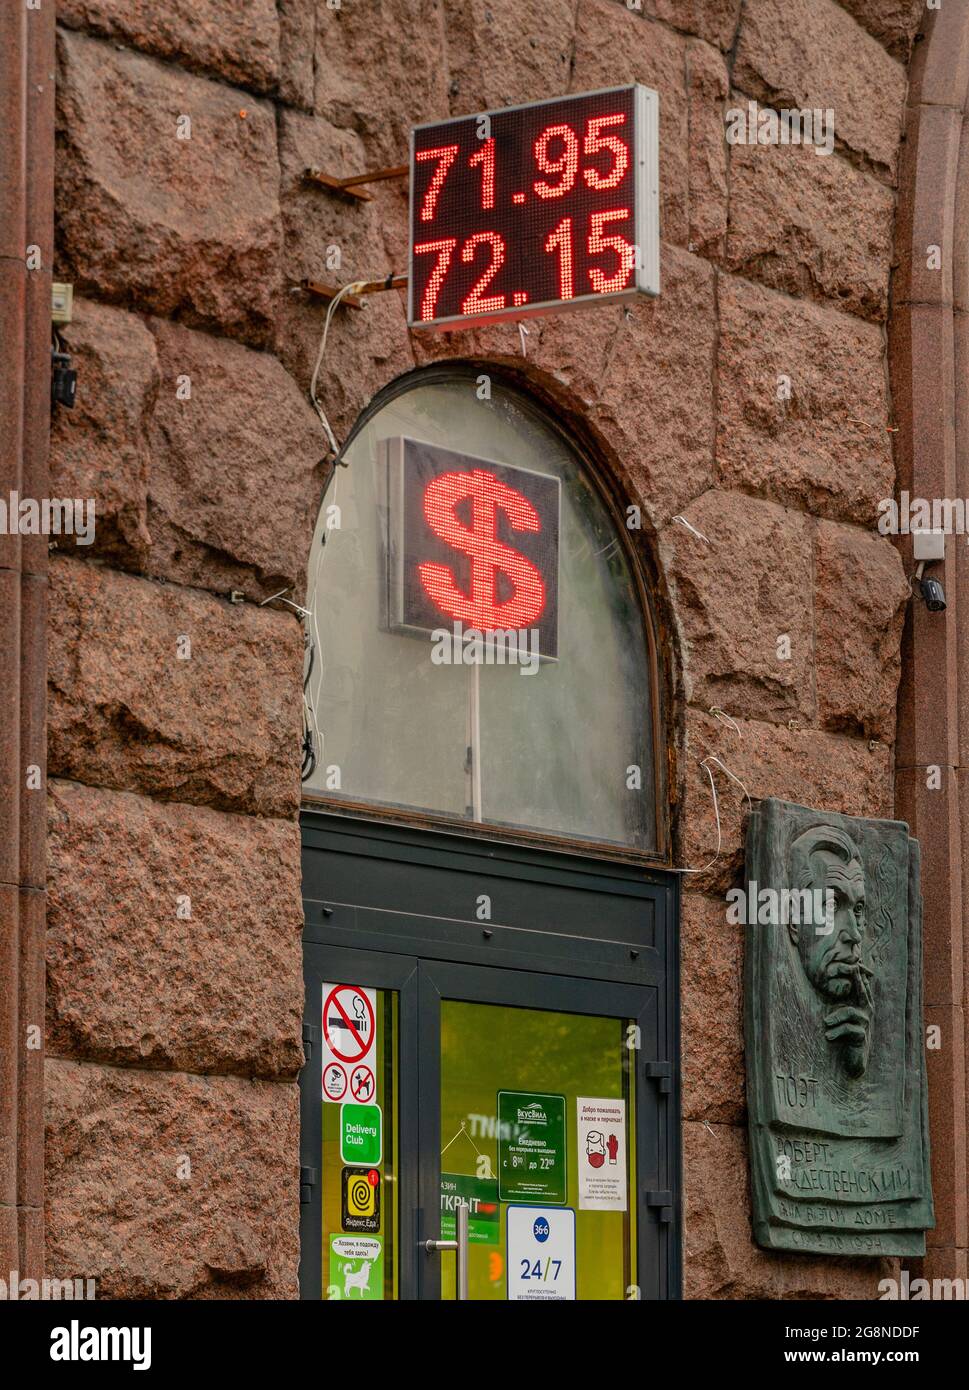 US dollar Exchange Rate sign on digital display outside historical building in central Moscow, Russia Stock Photo